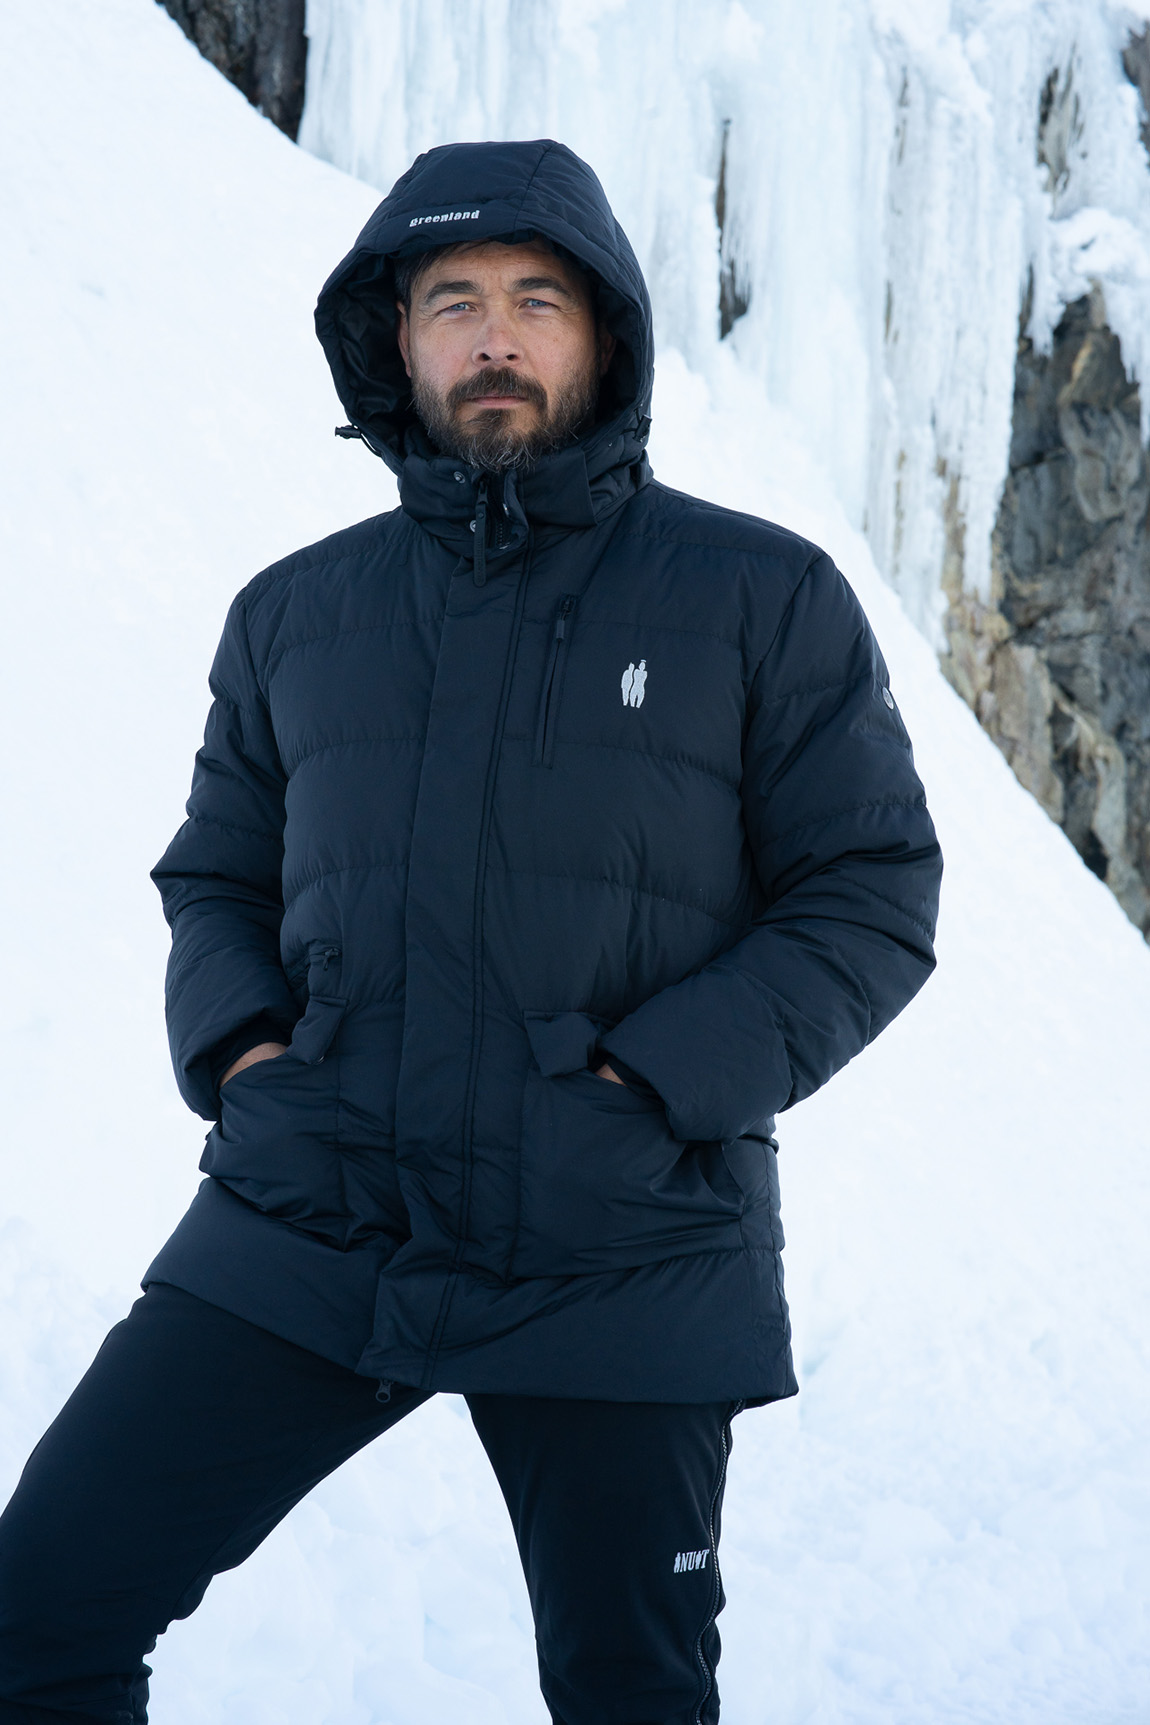 The outdoor wear from Inuit Quality Clothes of Greenland is inspired by Greenland’s harsh climate and magnificent nature.